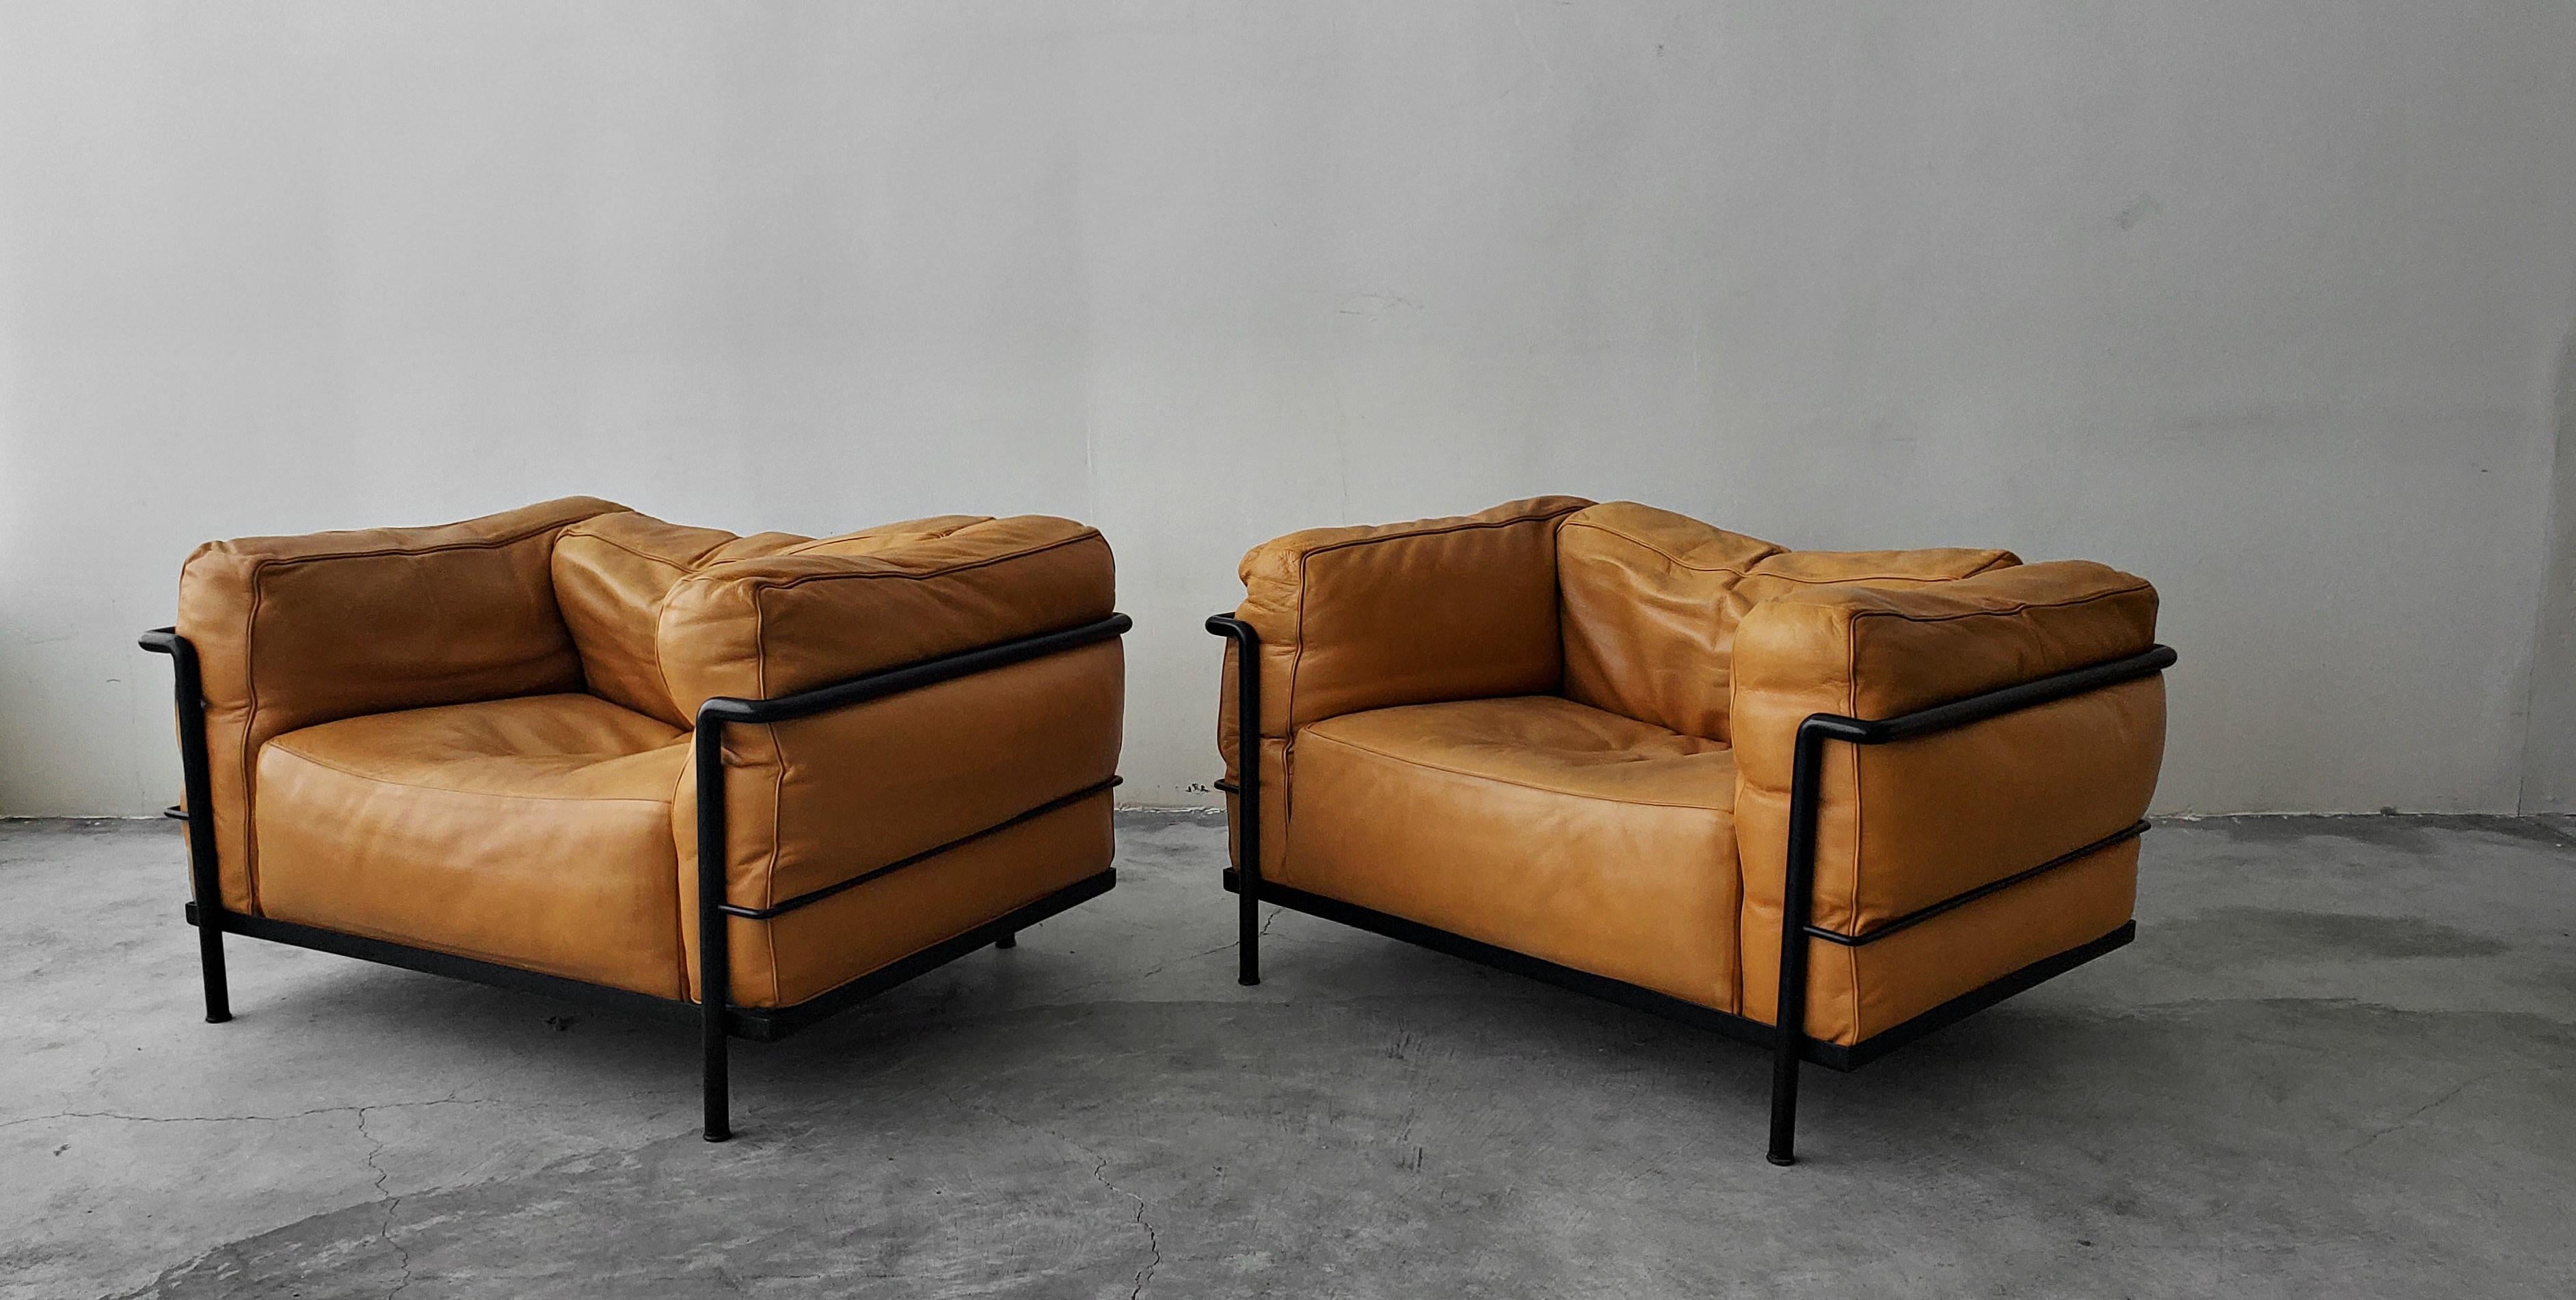 A rare pair of authentic, vintage LC3 Grand Modele armchairs with down cushions. Chairs are the super rare black frames with beautiful, butter soft cognac colored leather. The LC3's were designed by Le Corbusier, Pierre Jeanneret and Charlotte